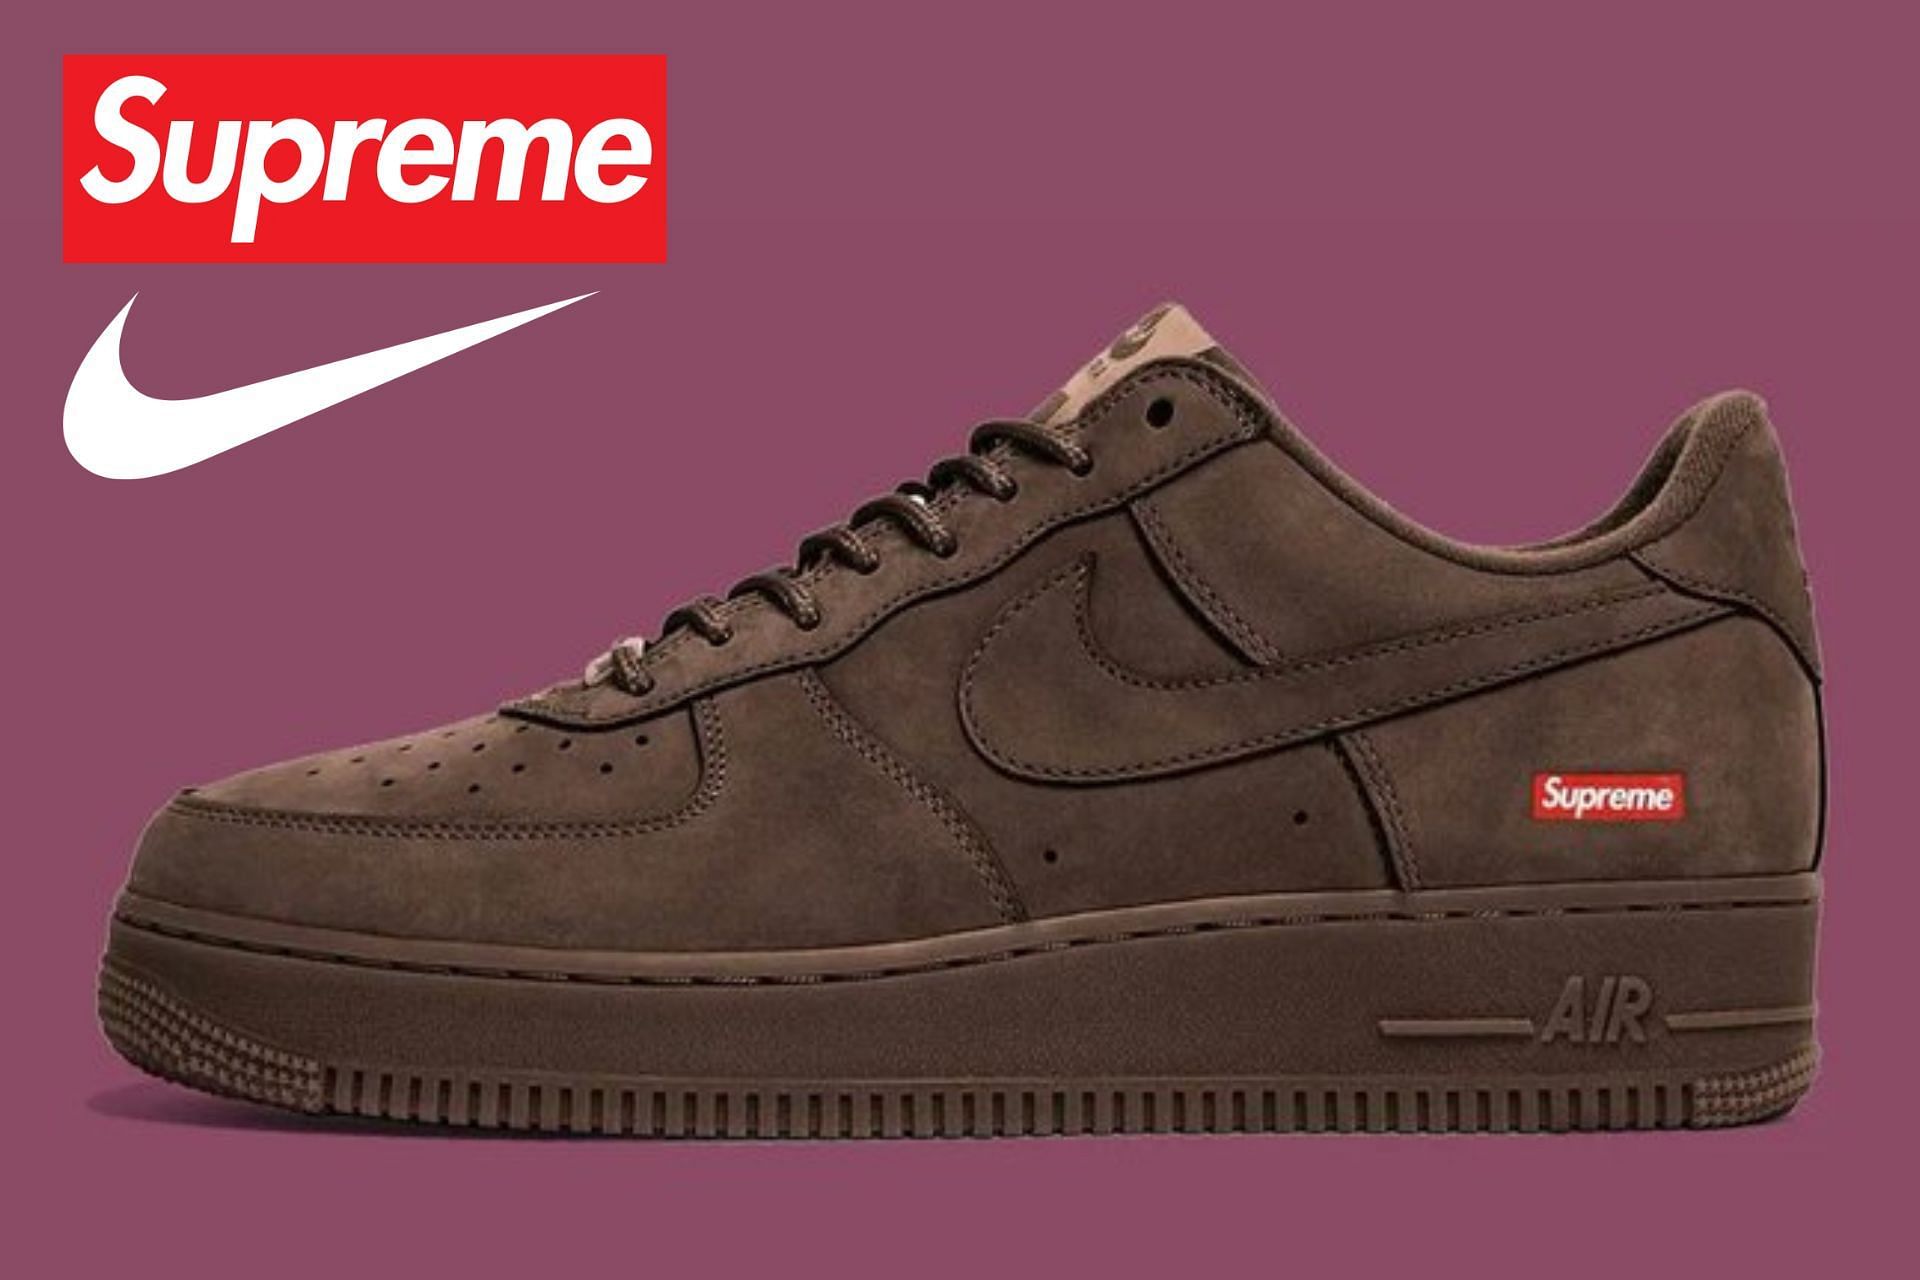 Supreme: Supreme x Nike Air Force 1 Low “Baroque Brown” shoes